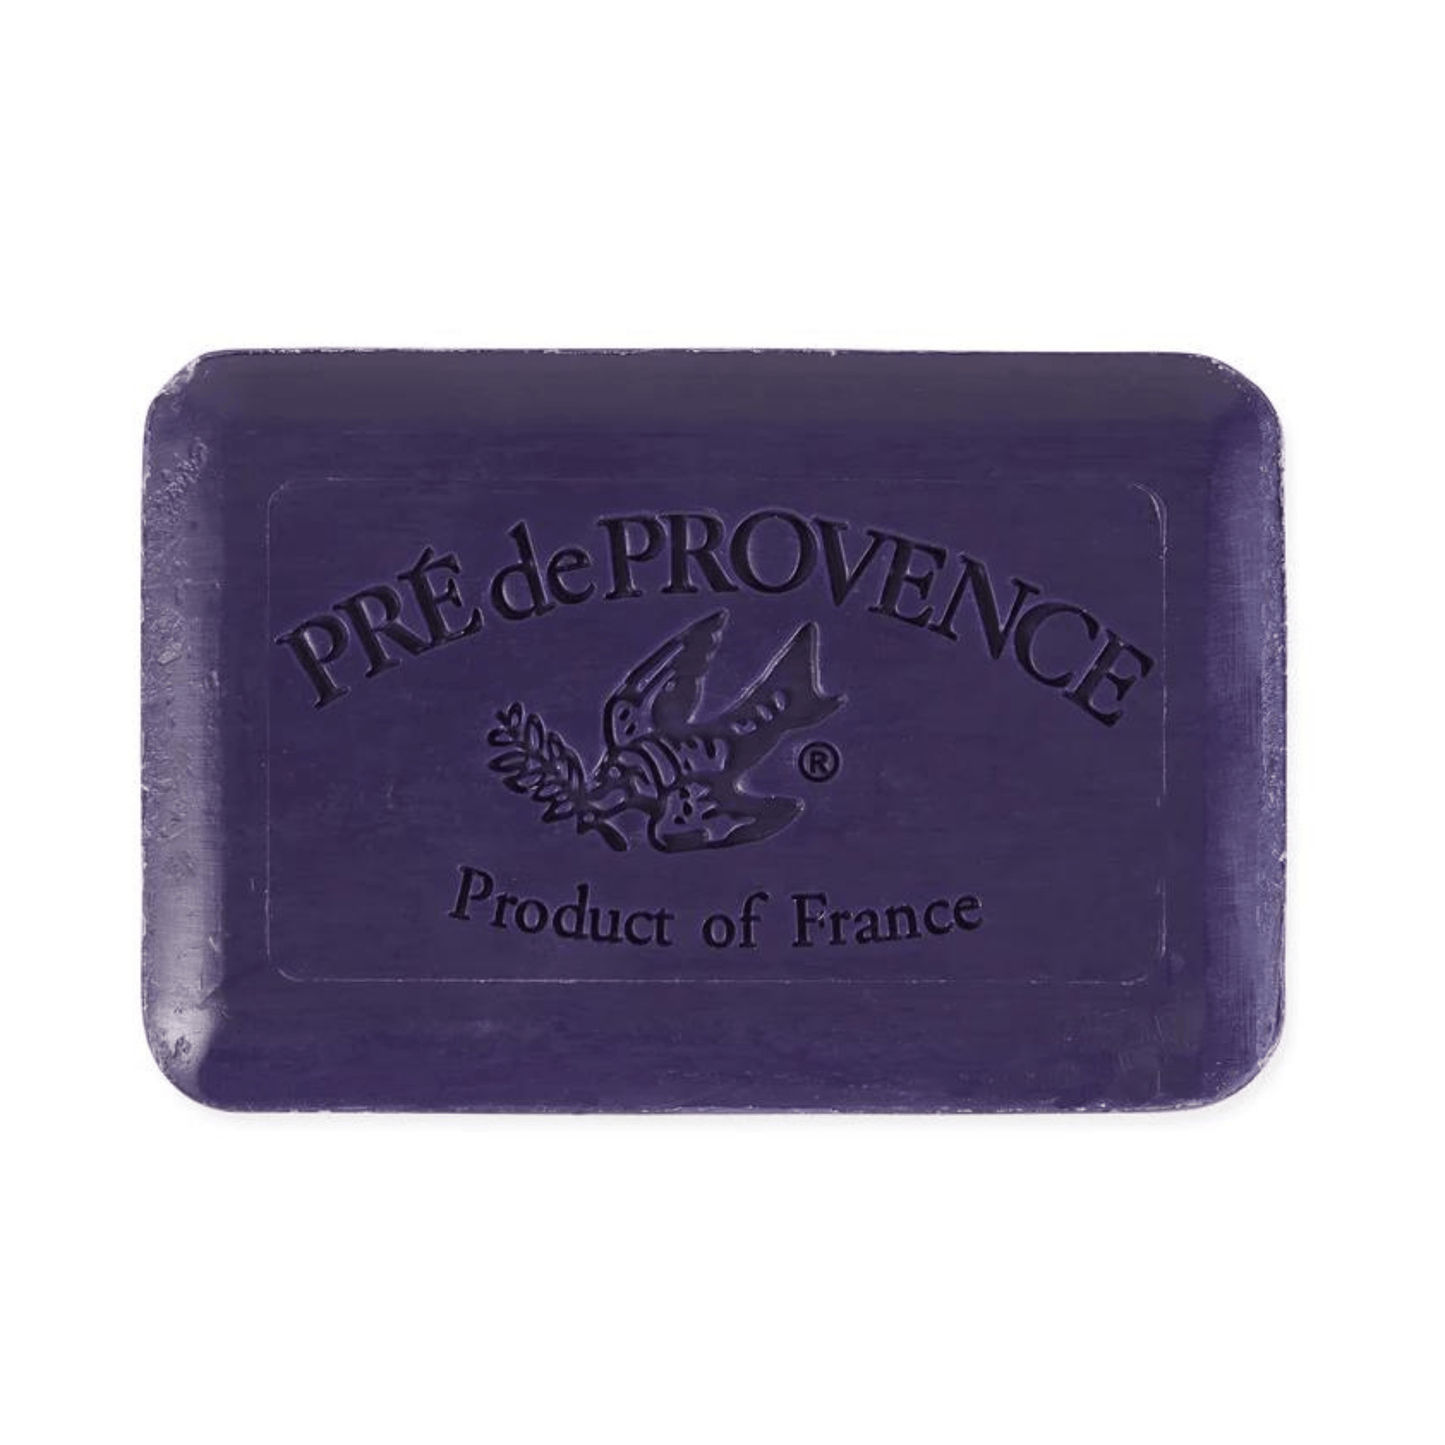 Primary Image of Black Currant Bar Soap